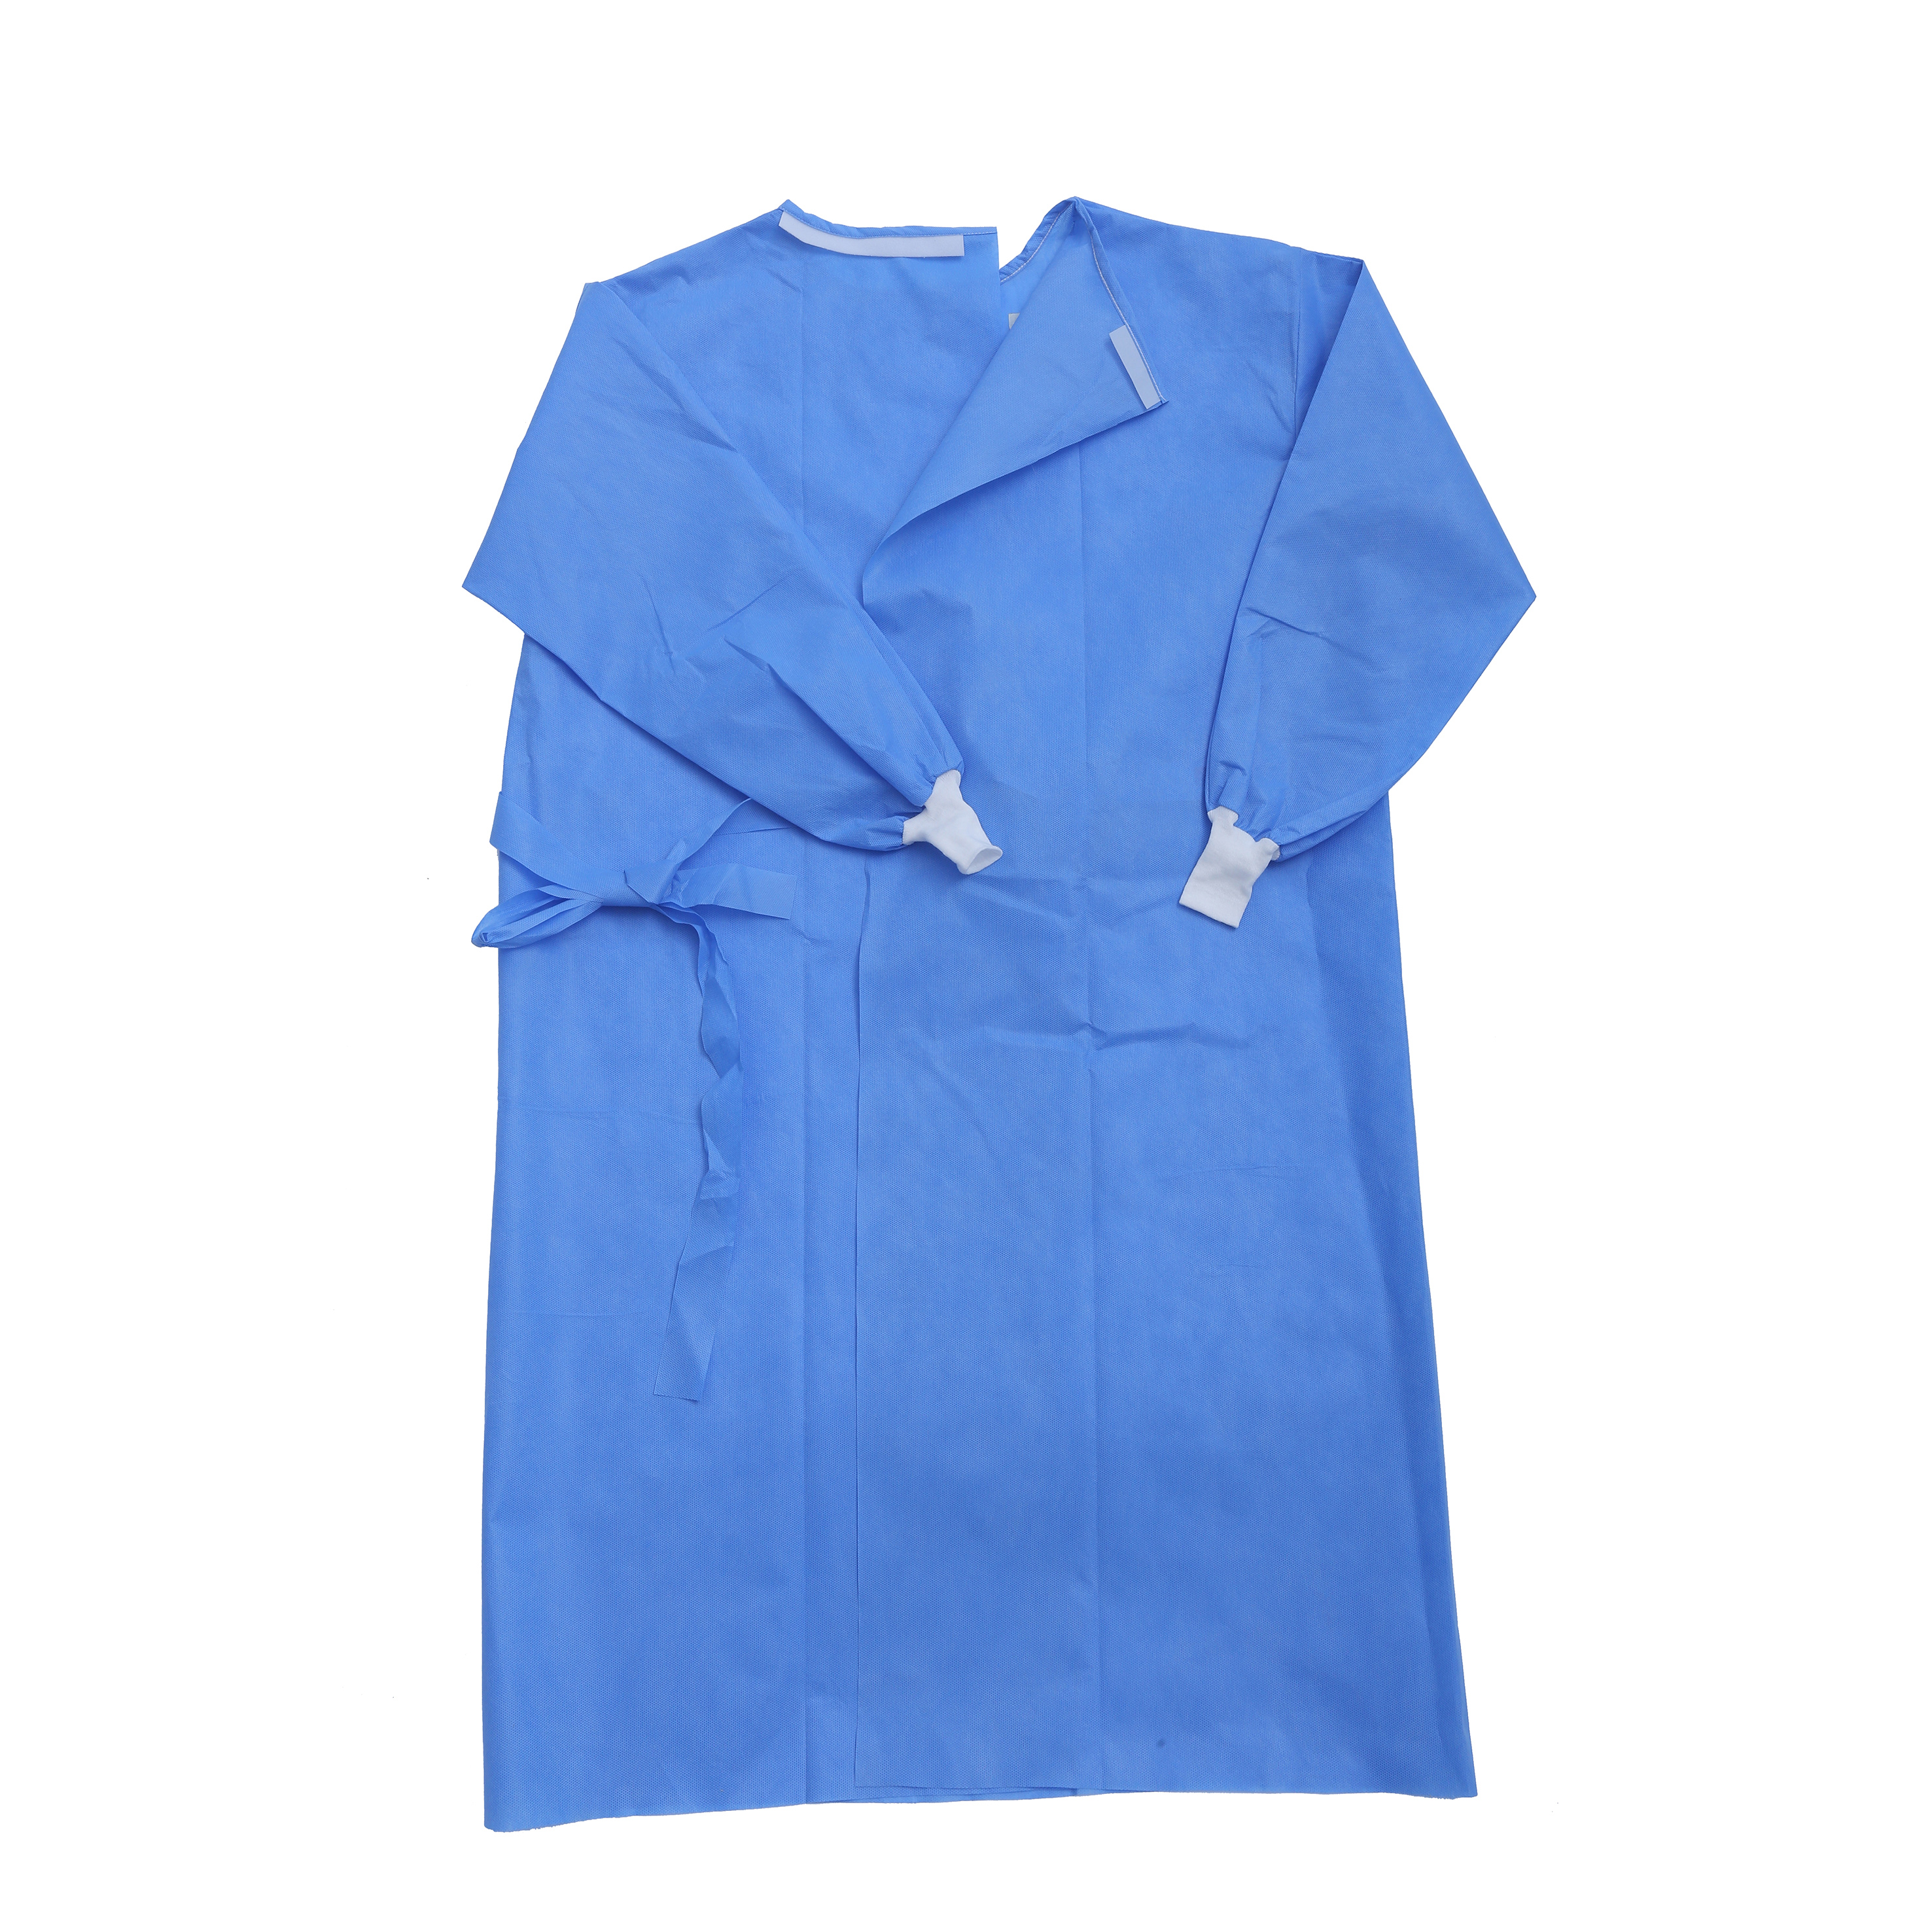 New Fashion Design for Marketing Service China - Hot Selling Disposable Isolation Gown Medical SMS Disposable Surgical Gown for Hospital – Sellers Union